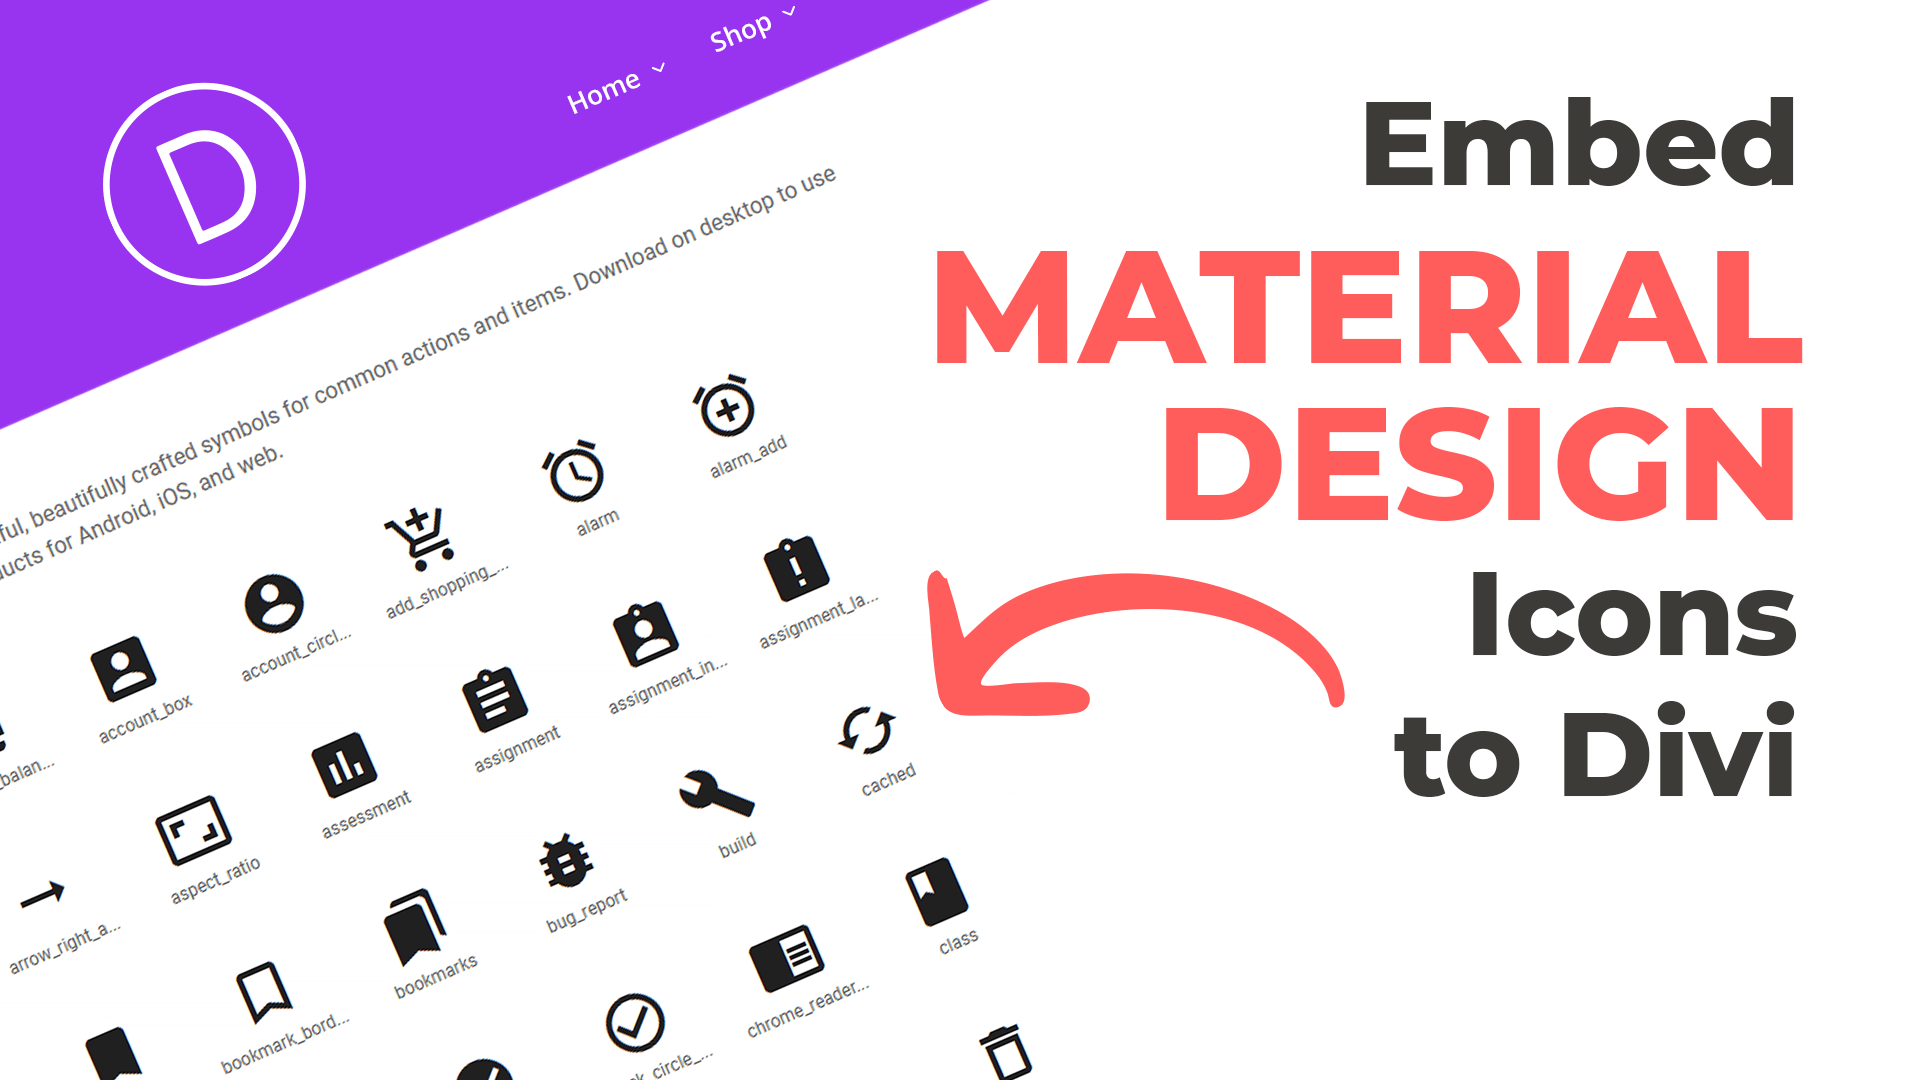 Embed Material Design Icons to Divi